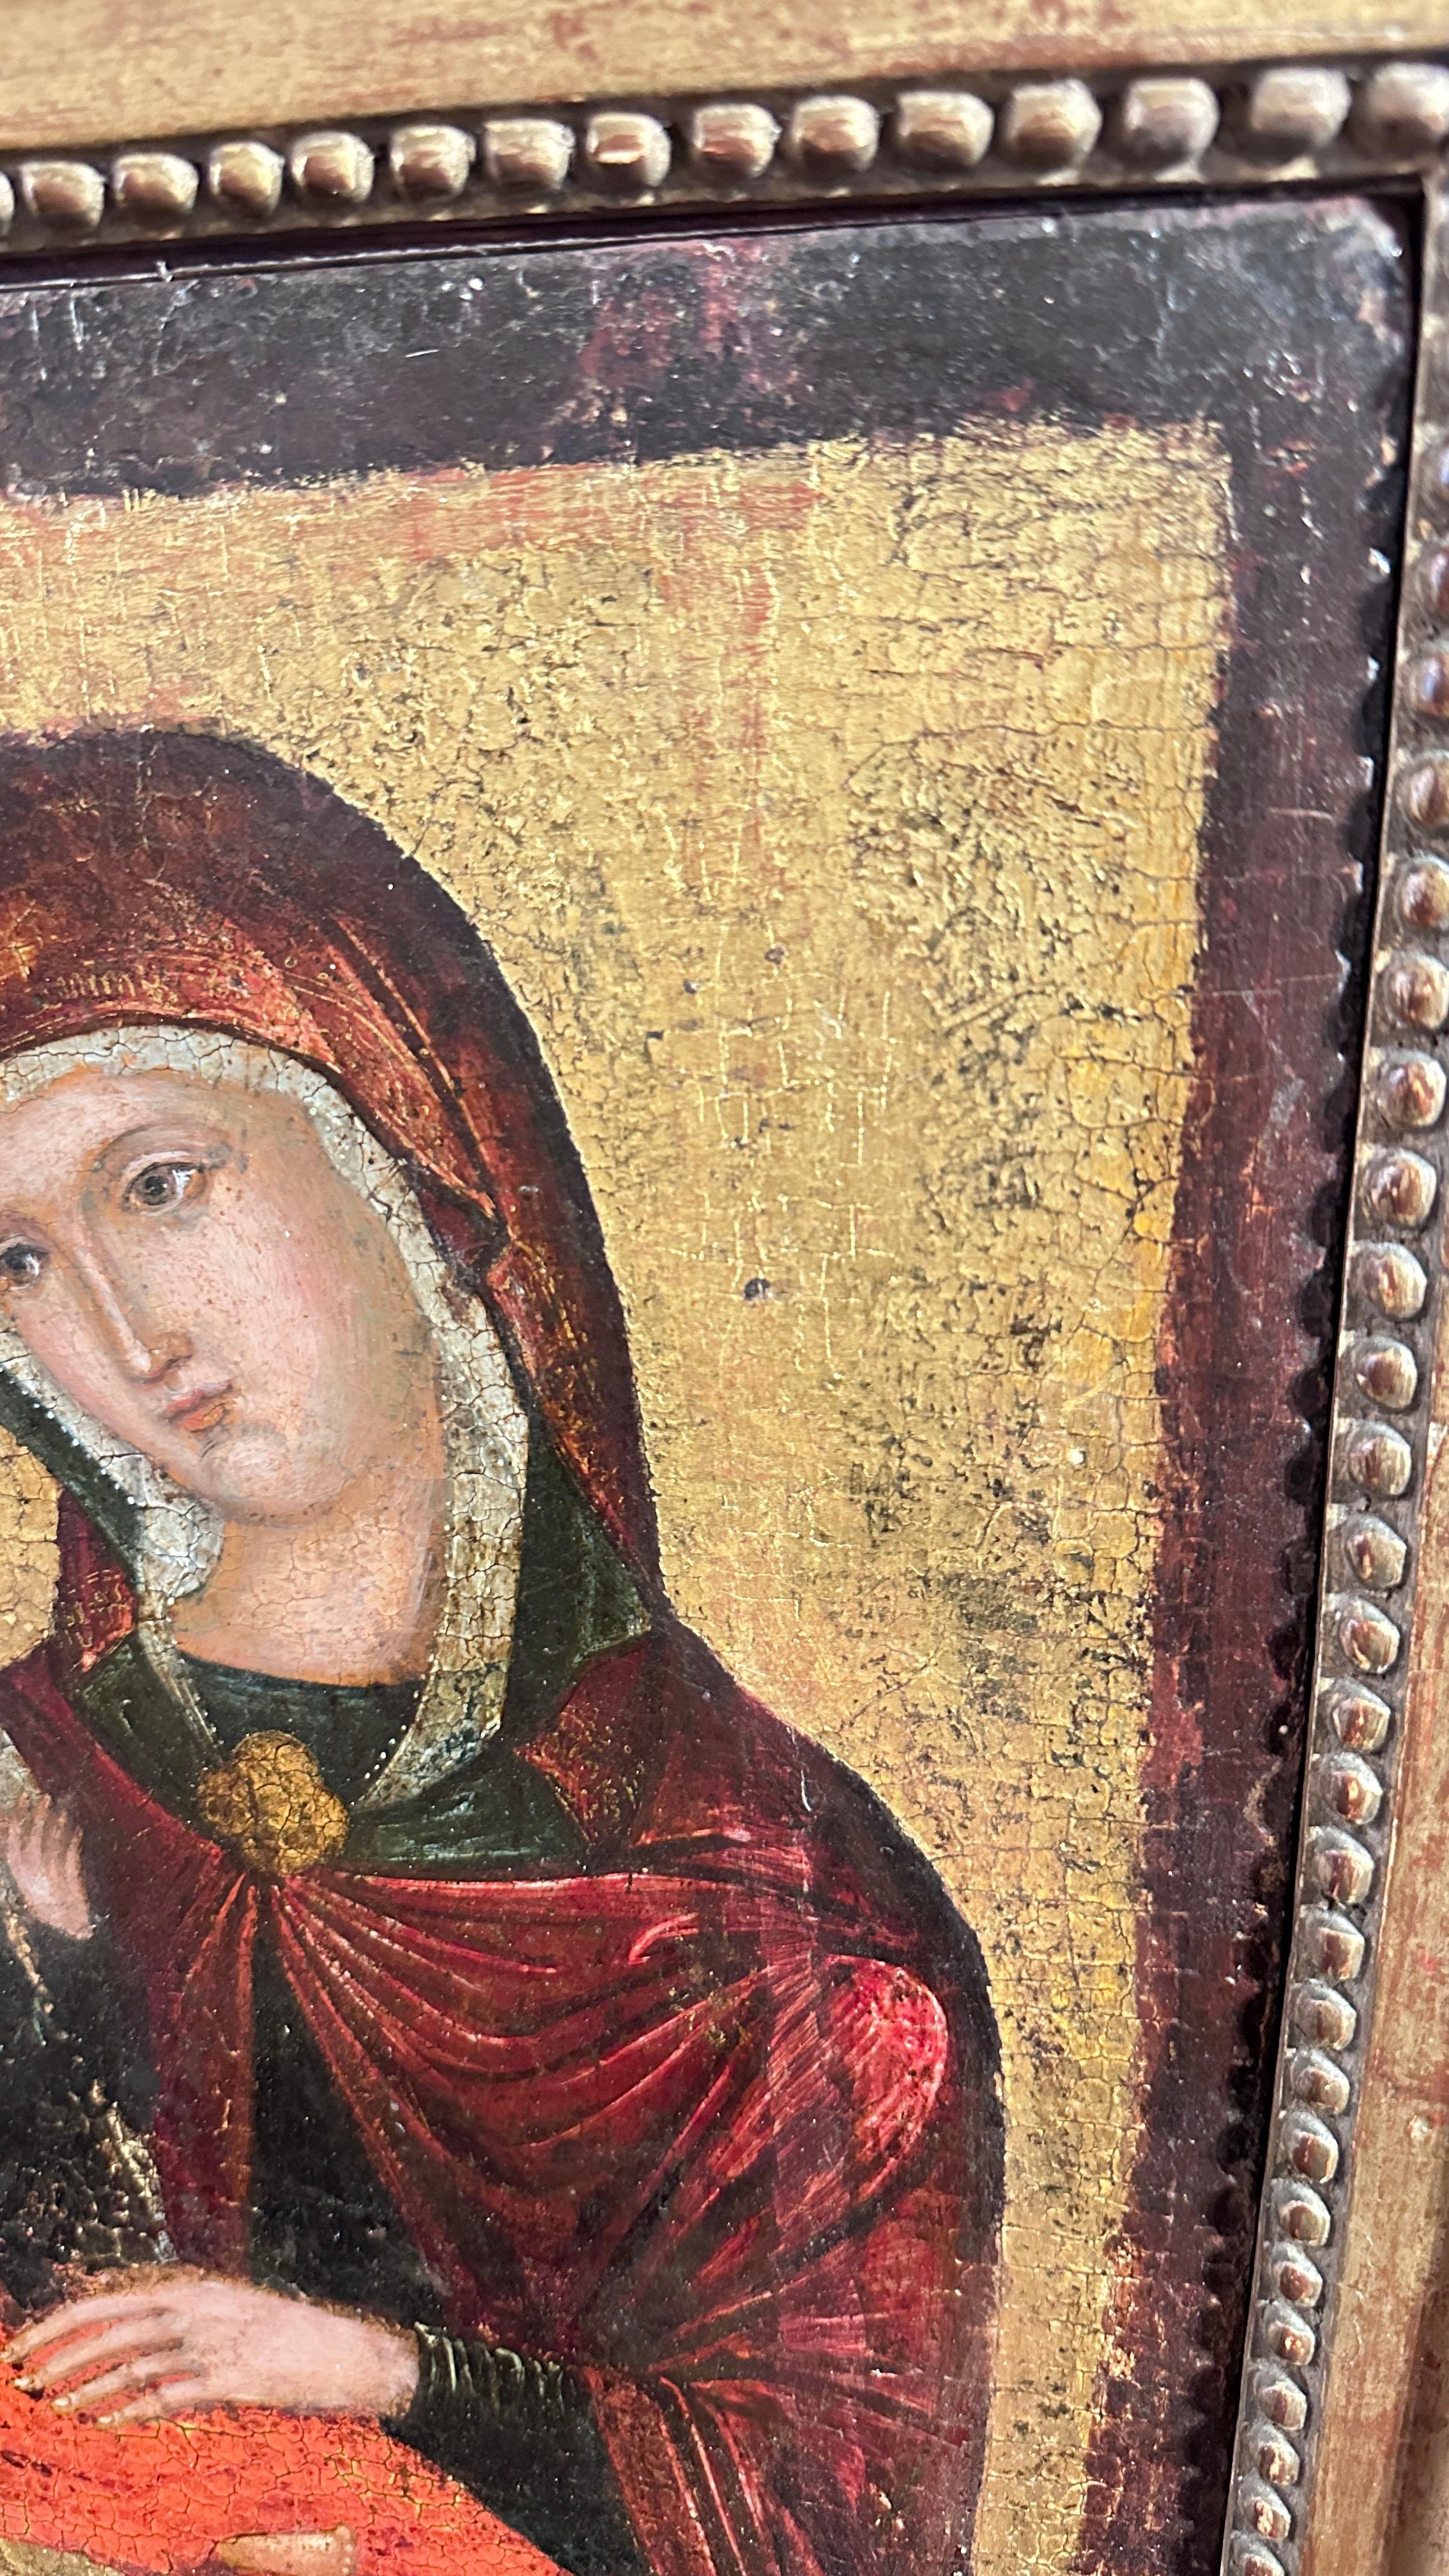 Gesso 16th CENTURY VIRGIN MARY WITH CHILD ON A GOLDEN BACKGROUND 